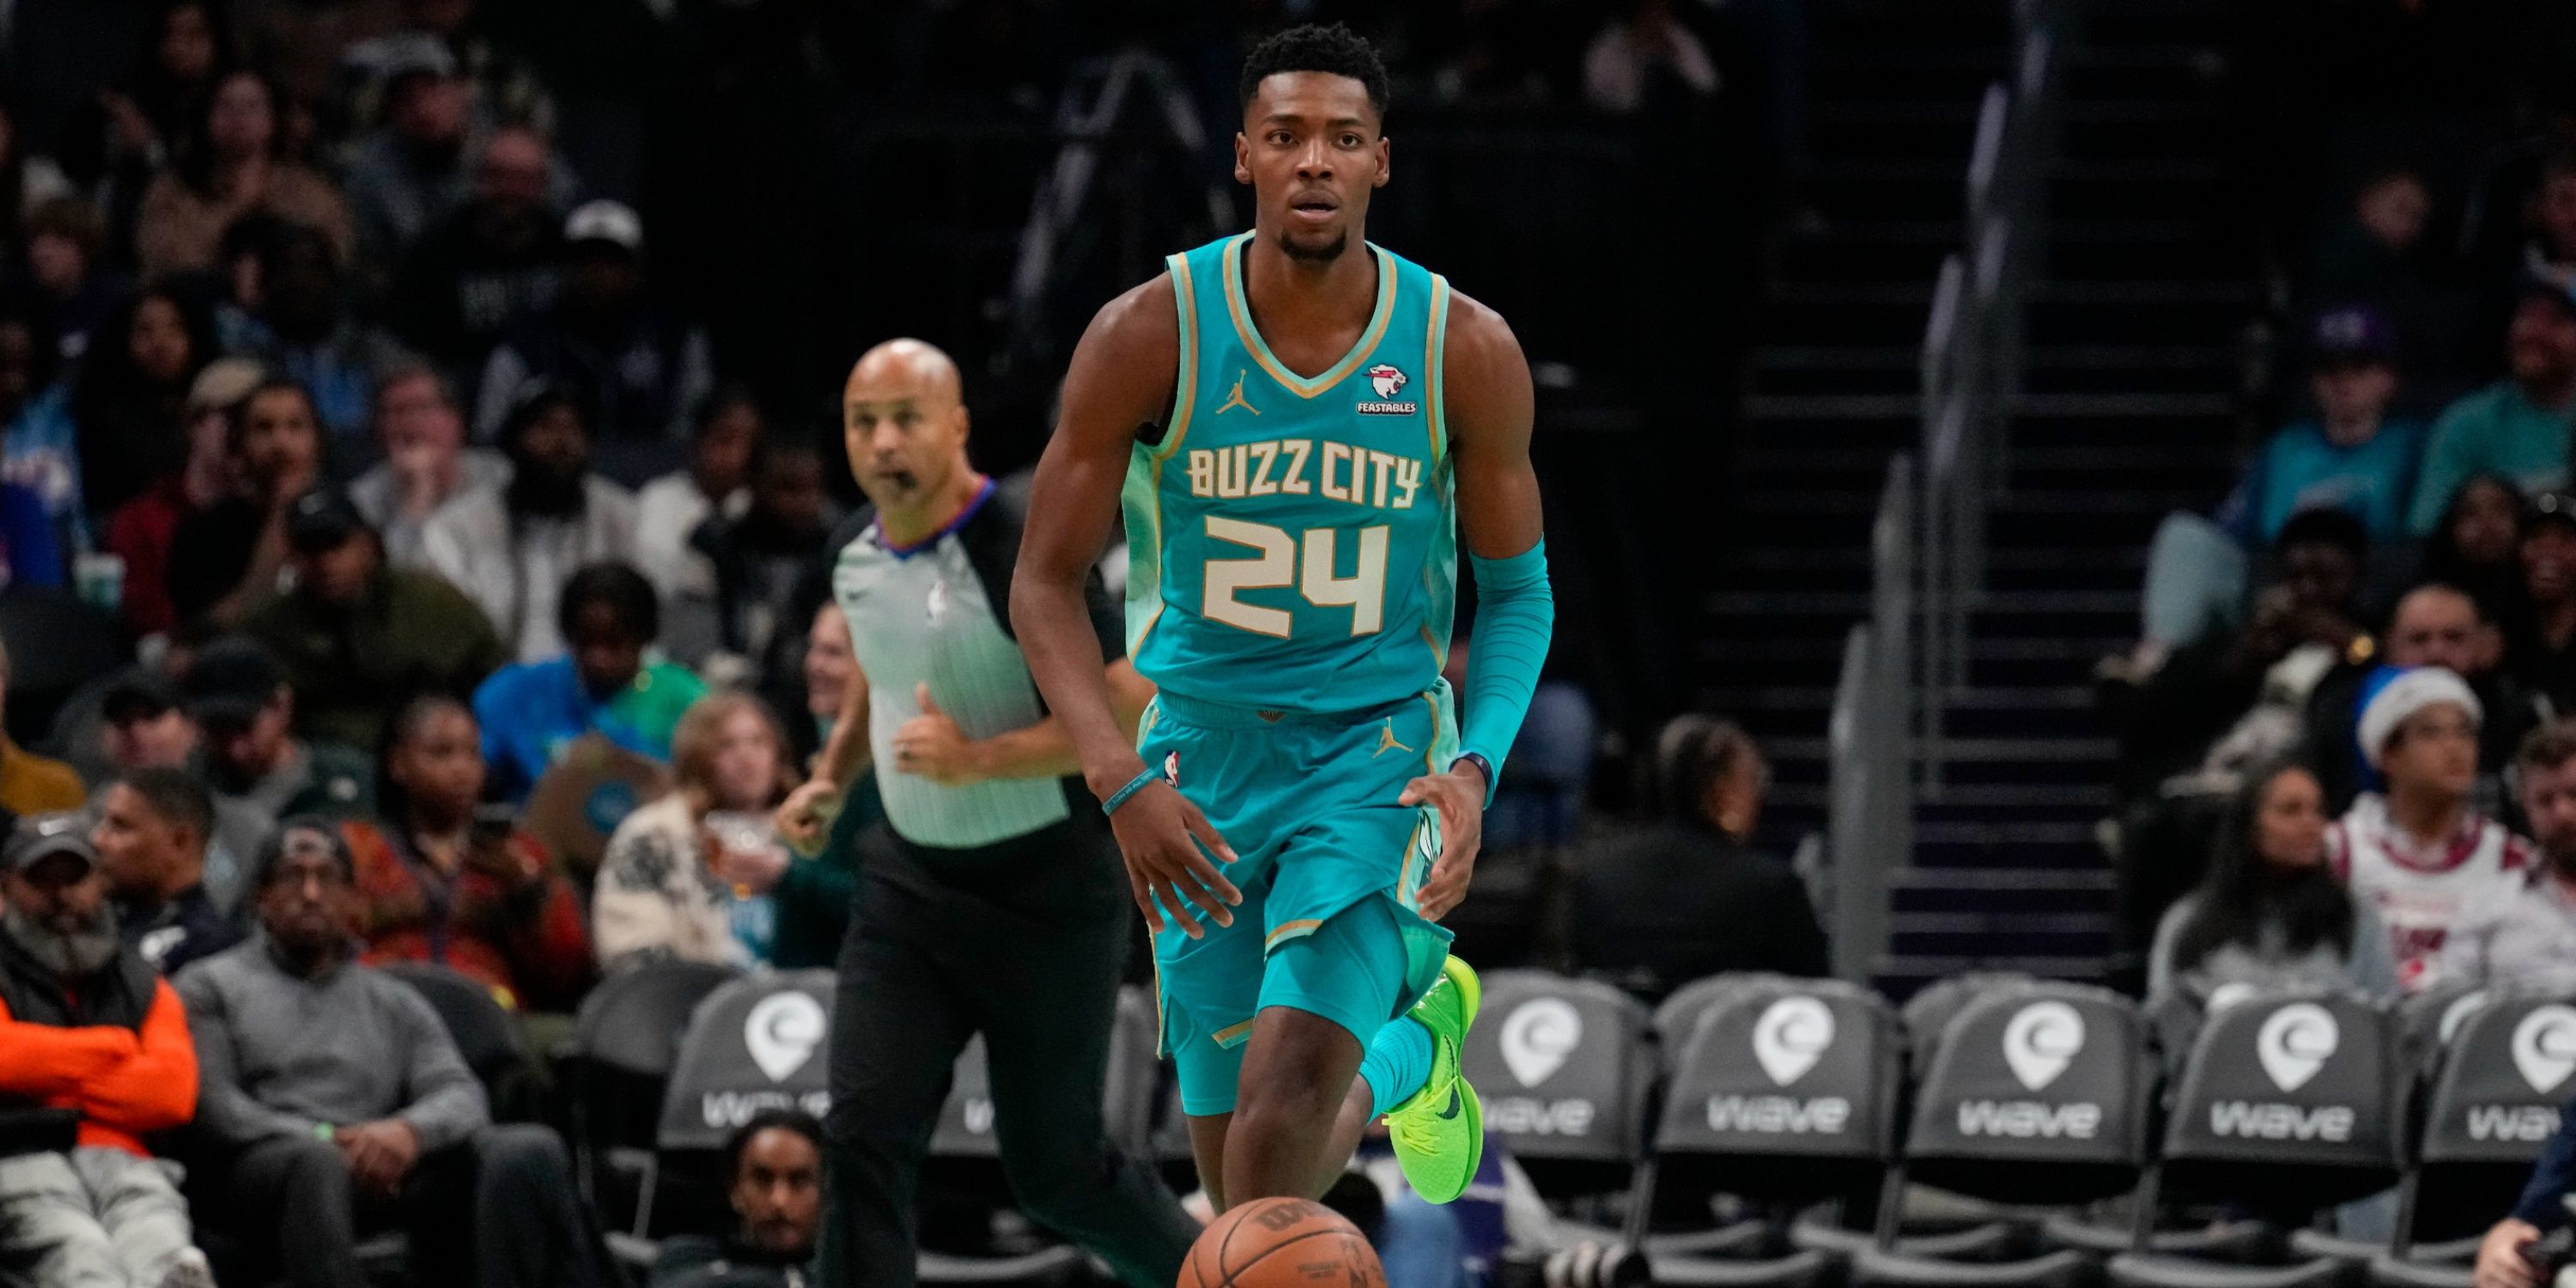 Hornets' rookie Brandon Miller is one of league's best young players